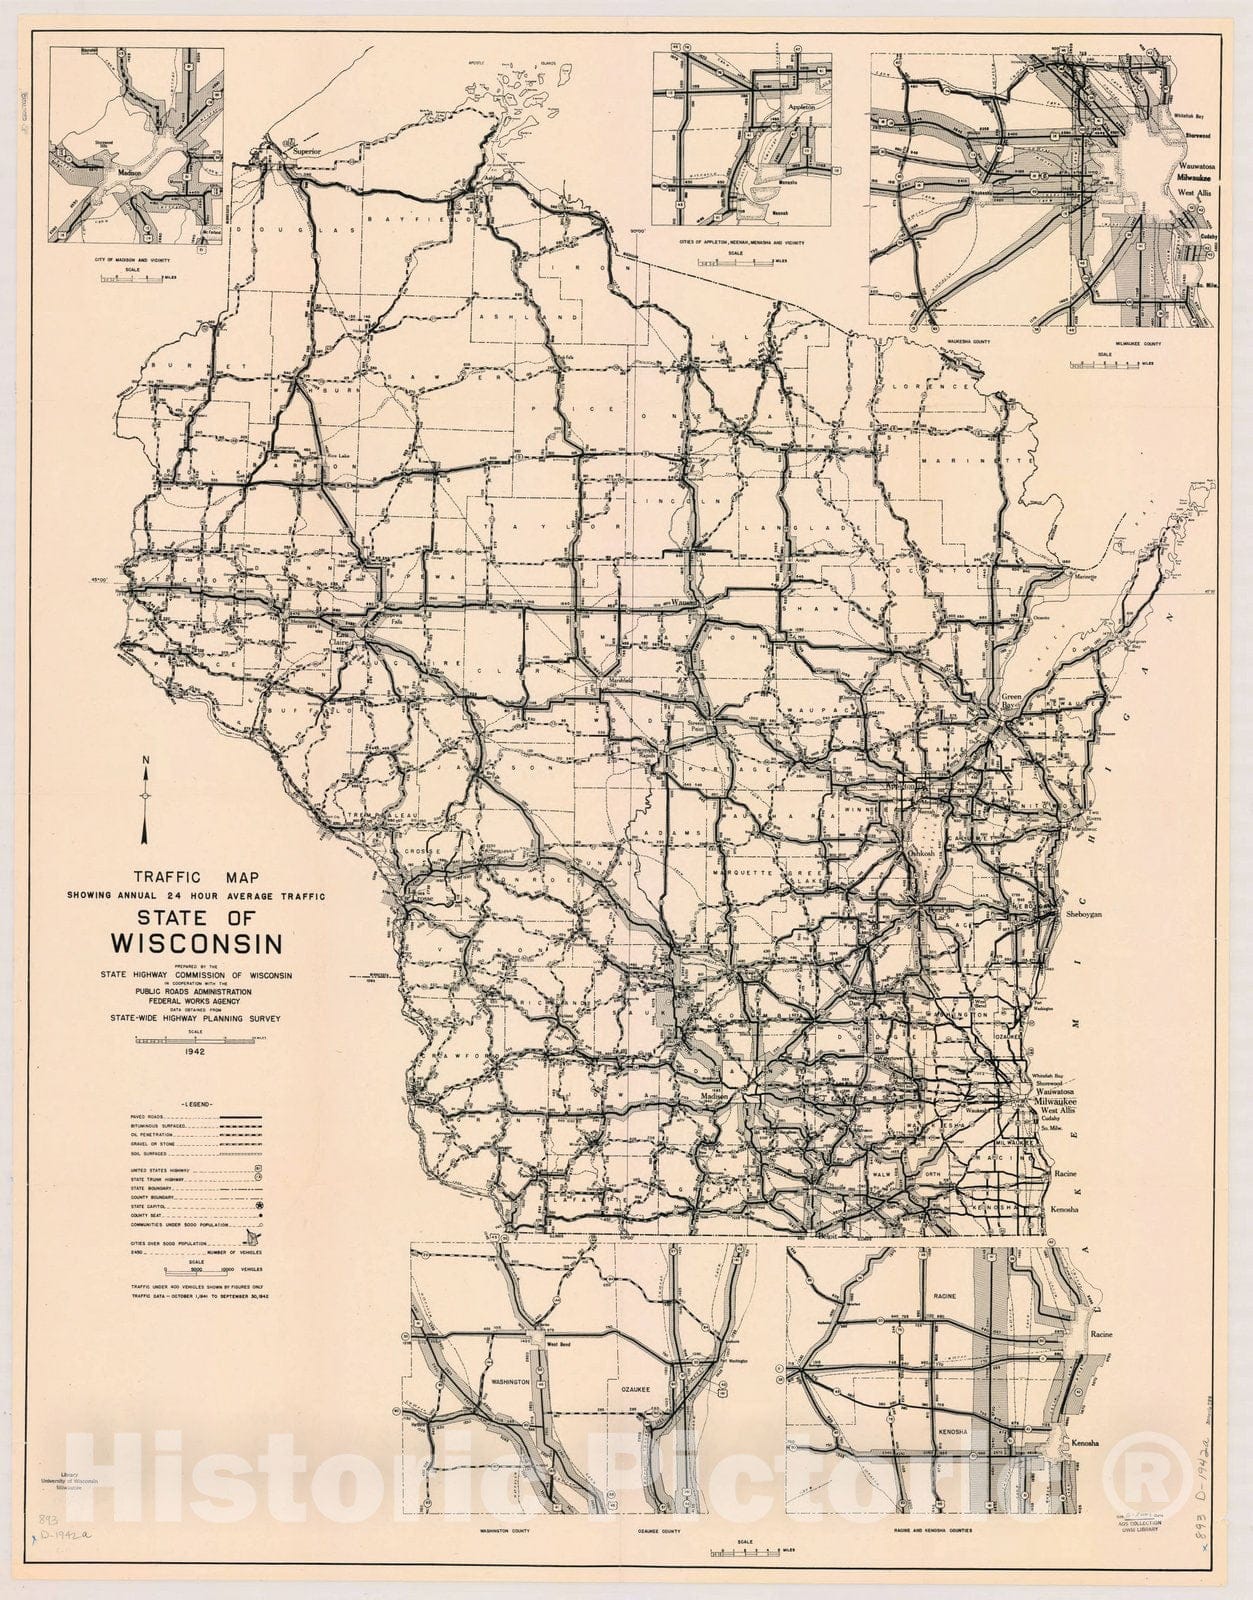 Map : Wisconsin 1942, Traffic map, showing annual 24 hour average traffic, state of Wisconsin , Antique Vintage Reproduction